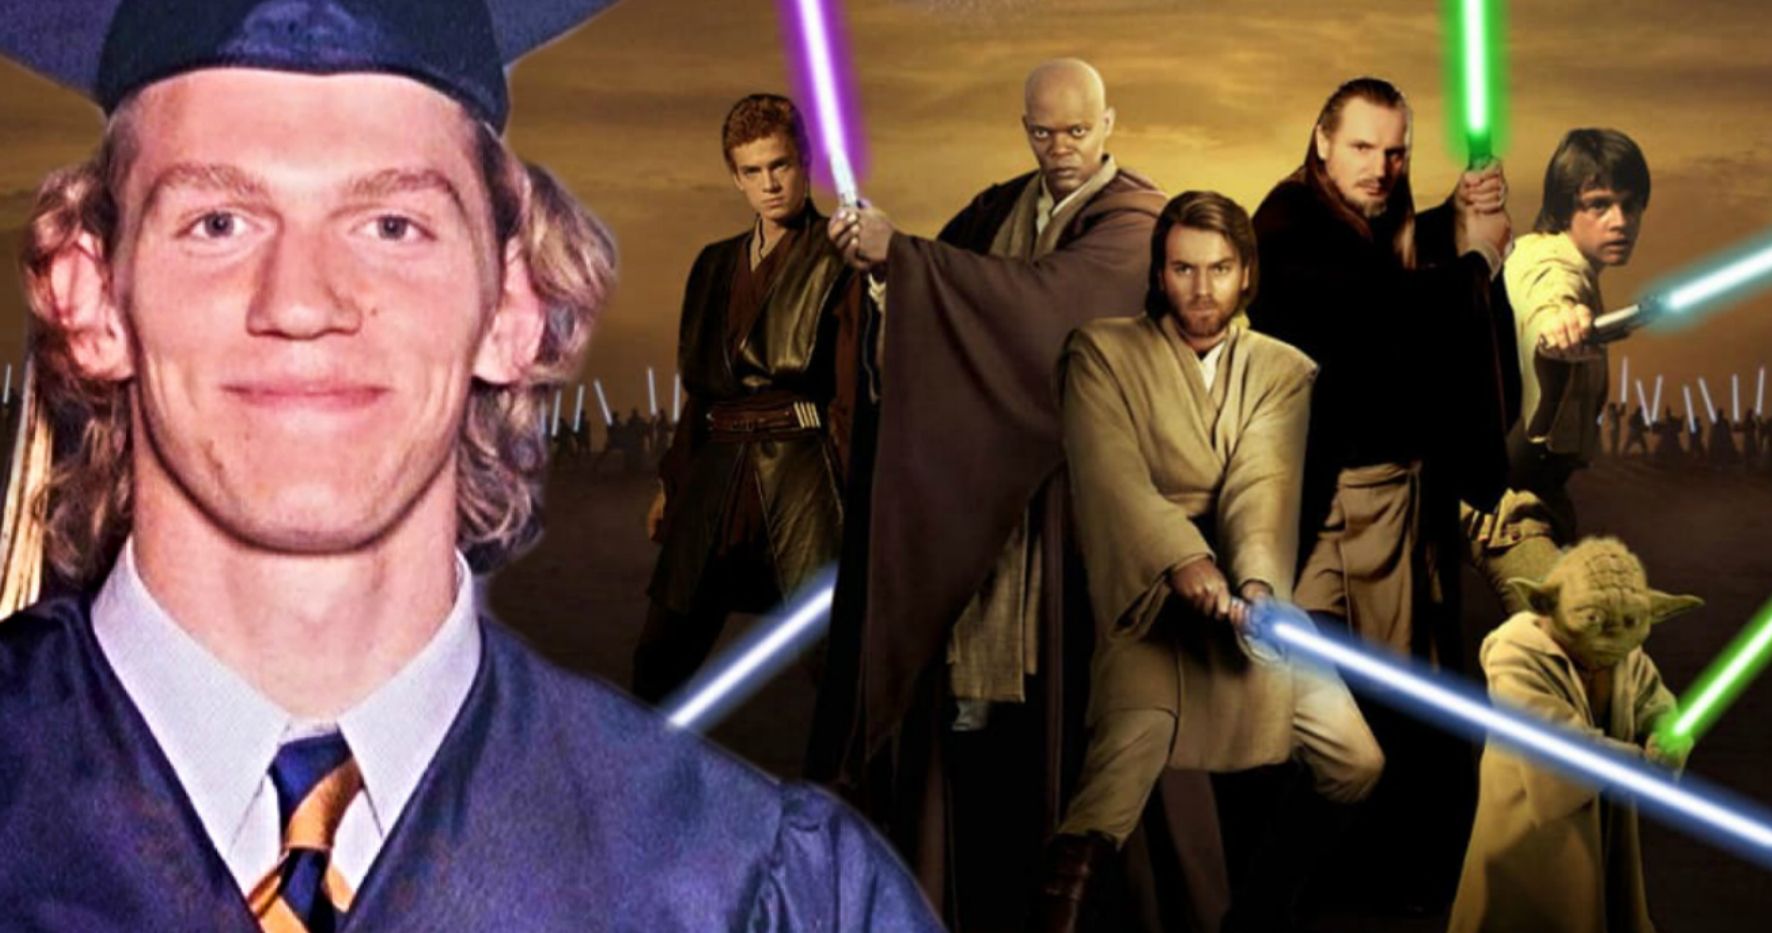 Hero Killed in College Shooting Gets Immortalized as a Star Wars Jedi